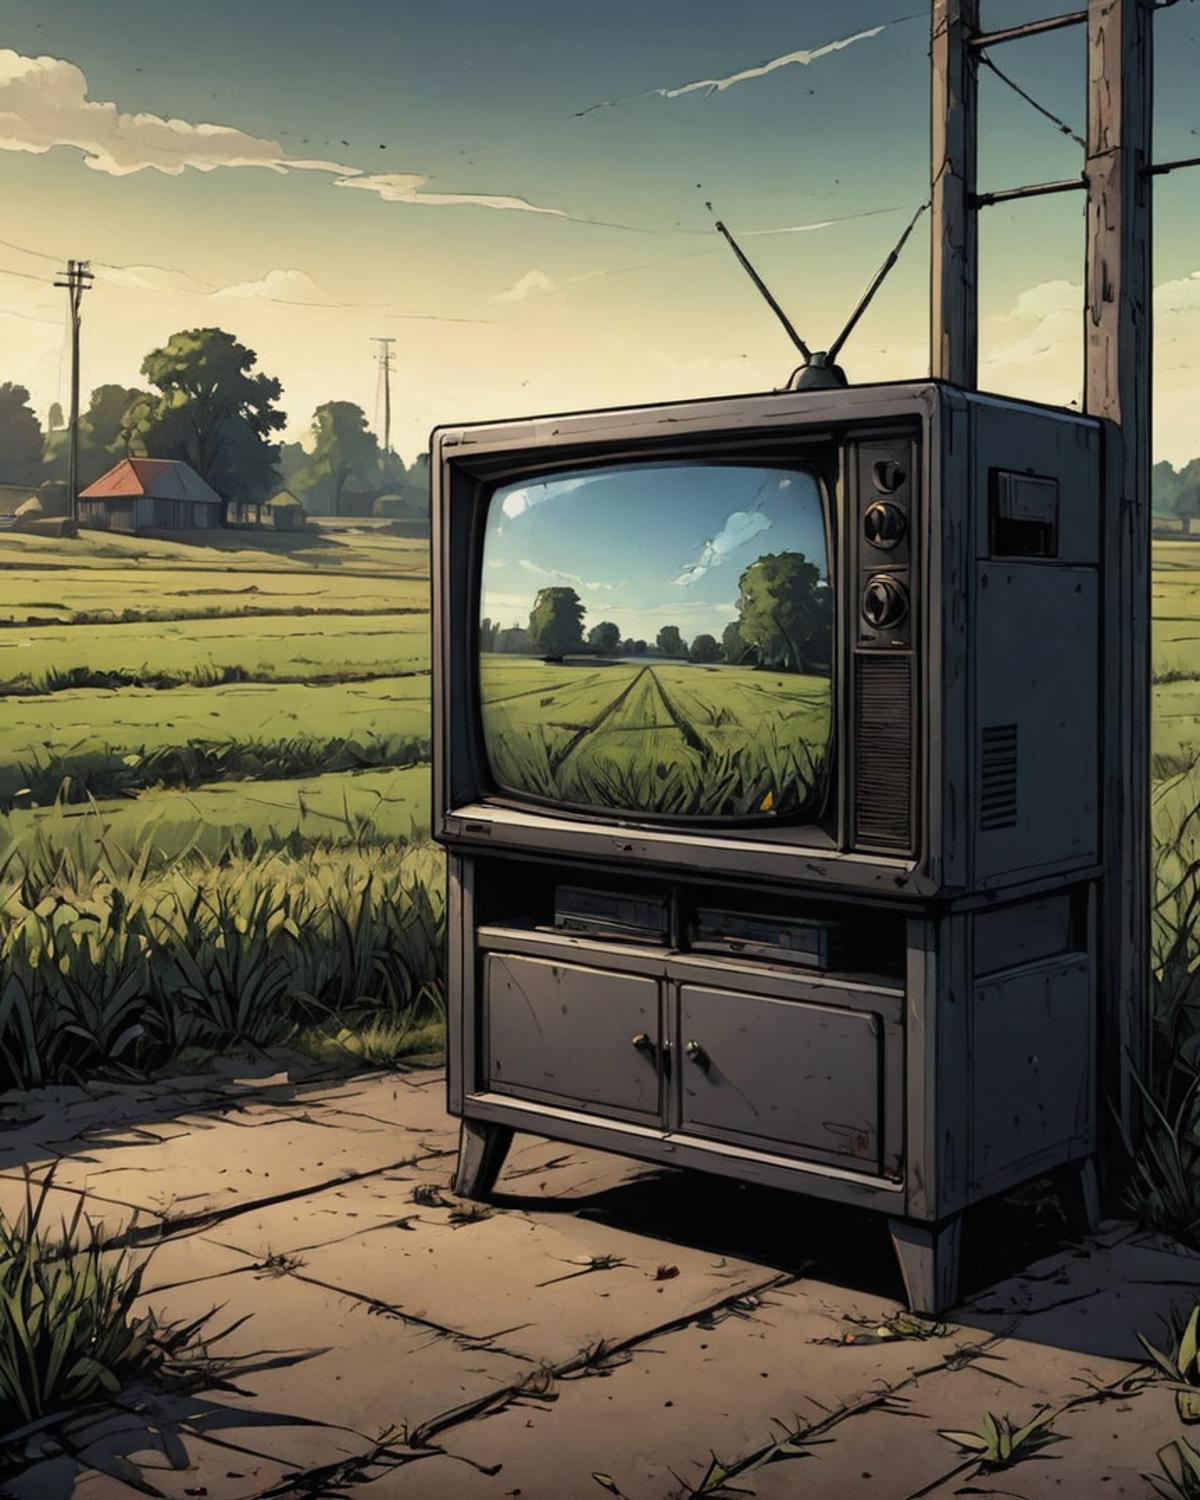 A vintage television set in a field, with grass and a house in the background.